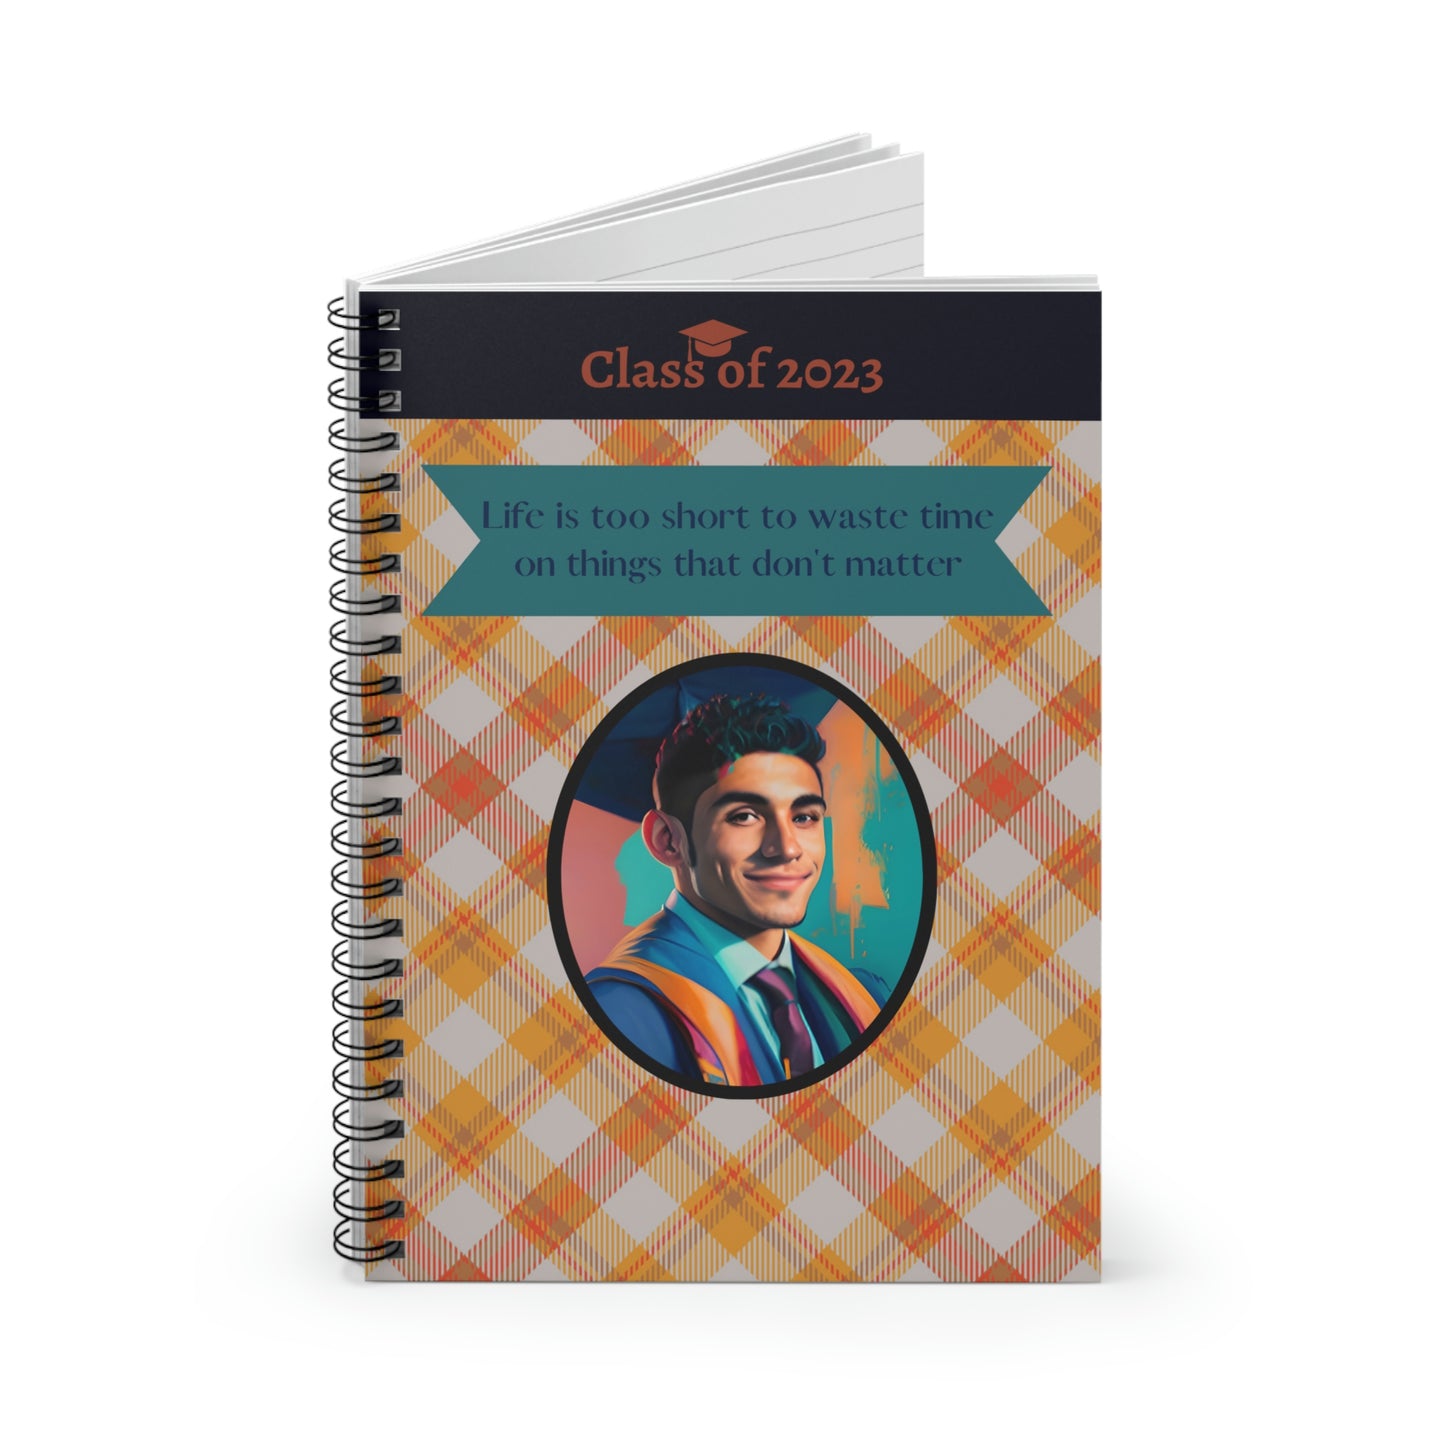 Class of 2023 Graduate Journal - (Latino Young Man 2) - Ruled Line